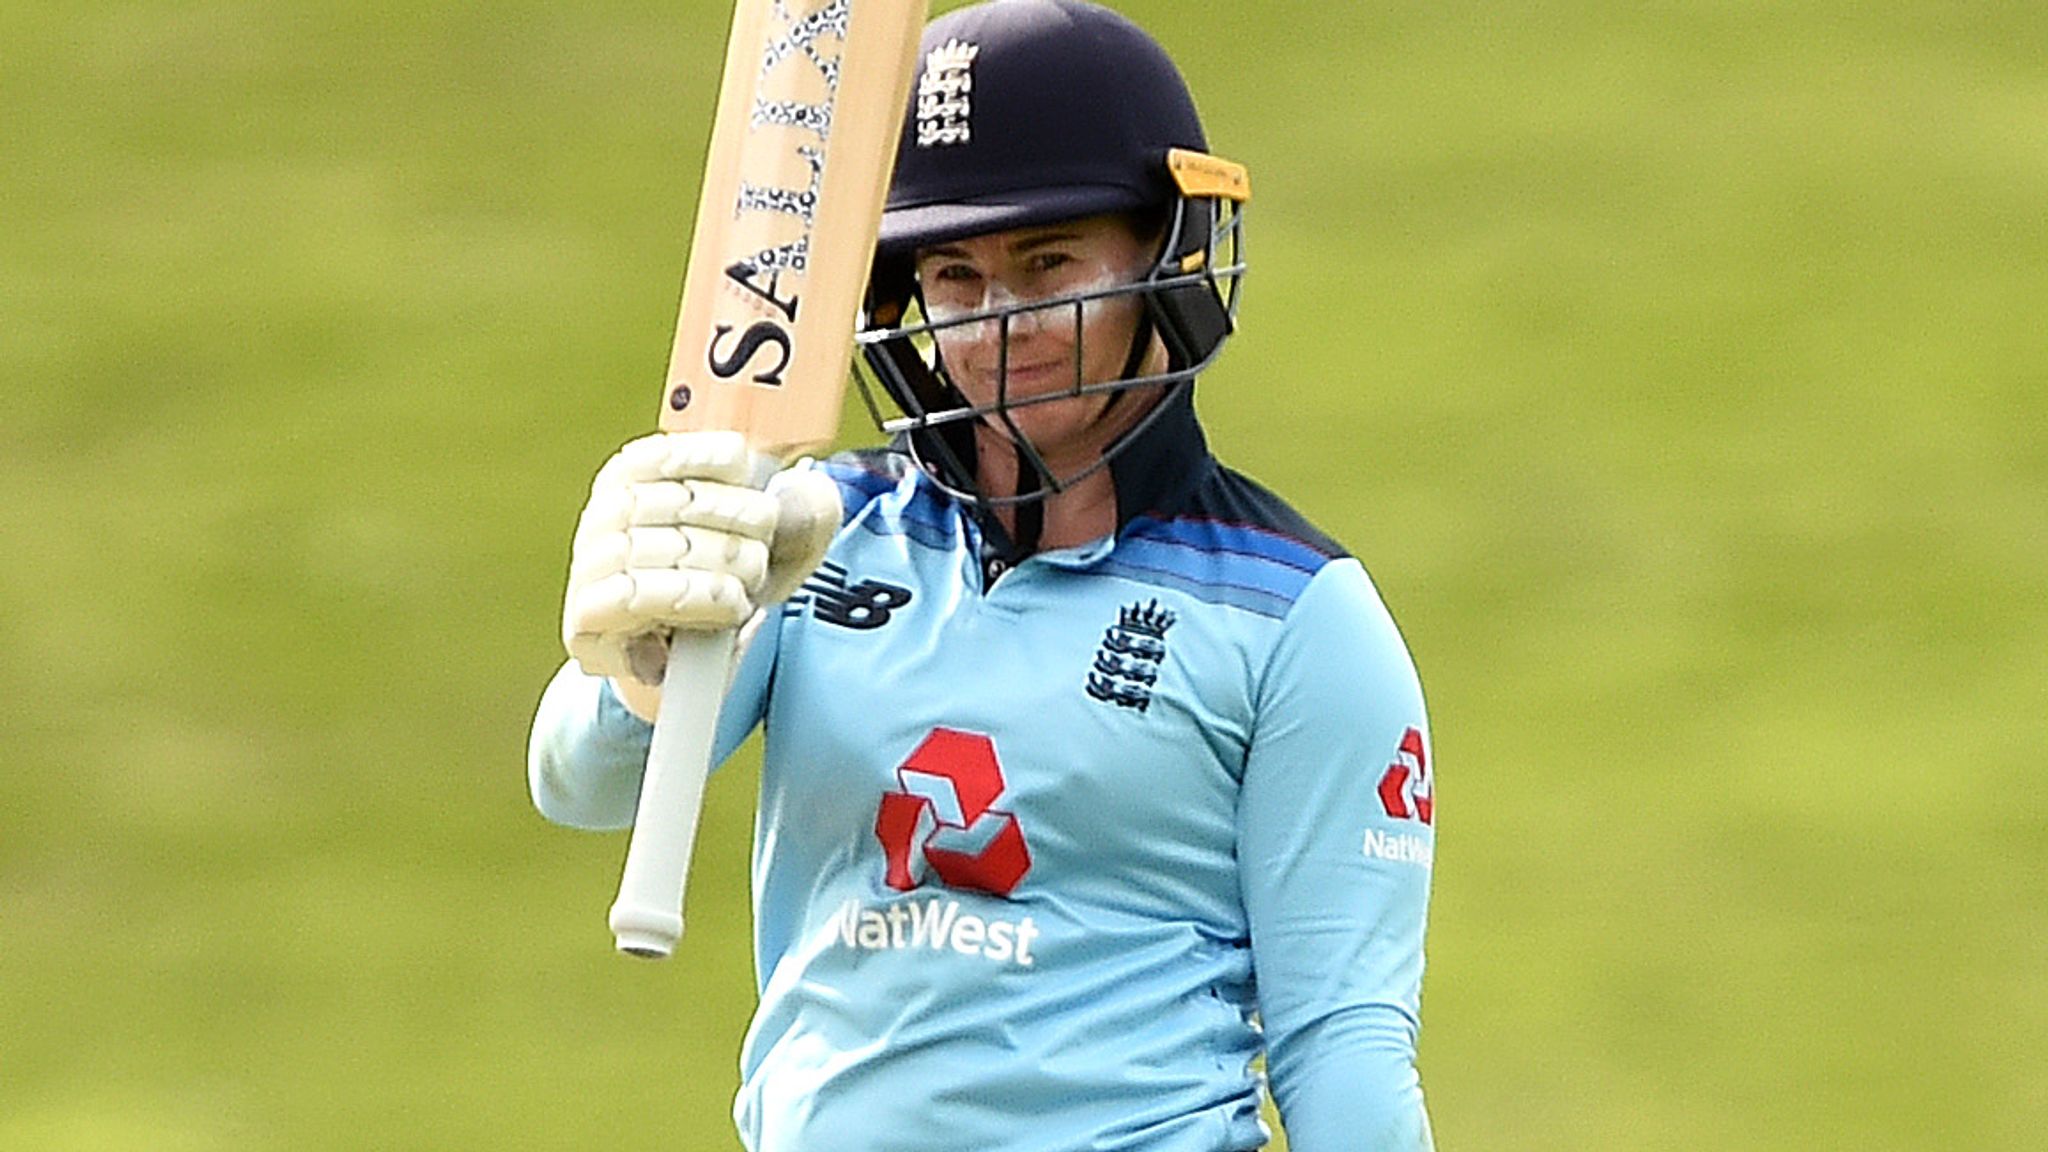 England Women&#39;s Tammy Beaumont tops ODI batting rankings for first time |  Cricket News | Sky Sports